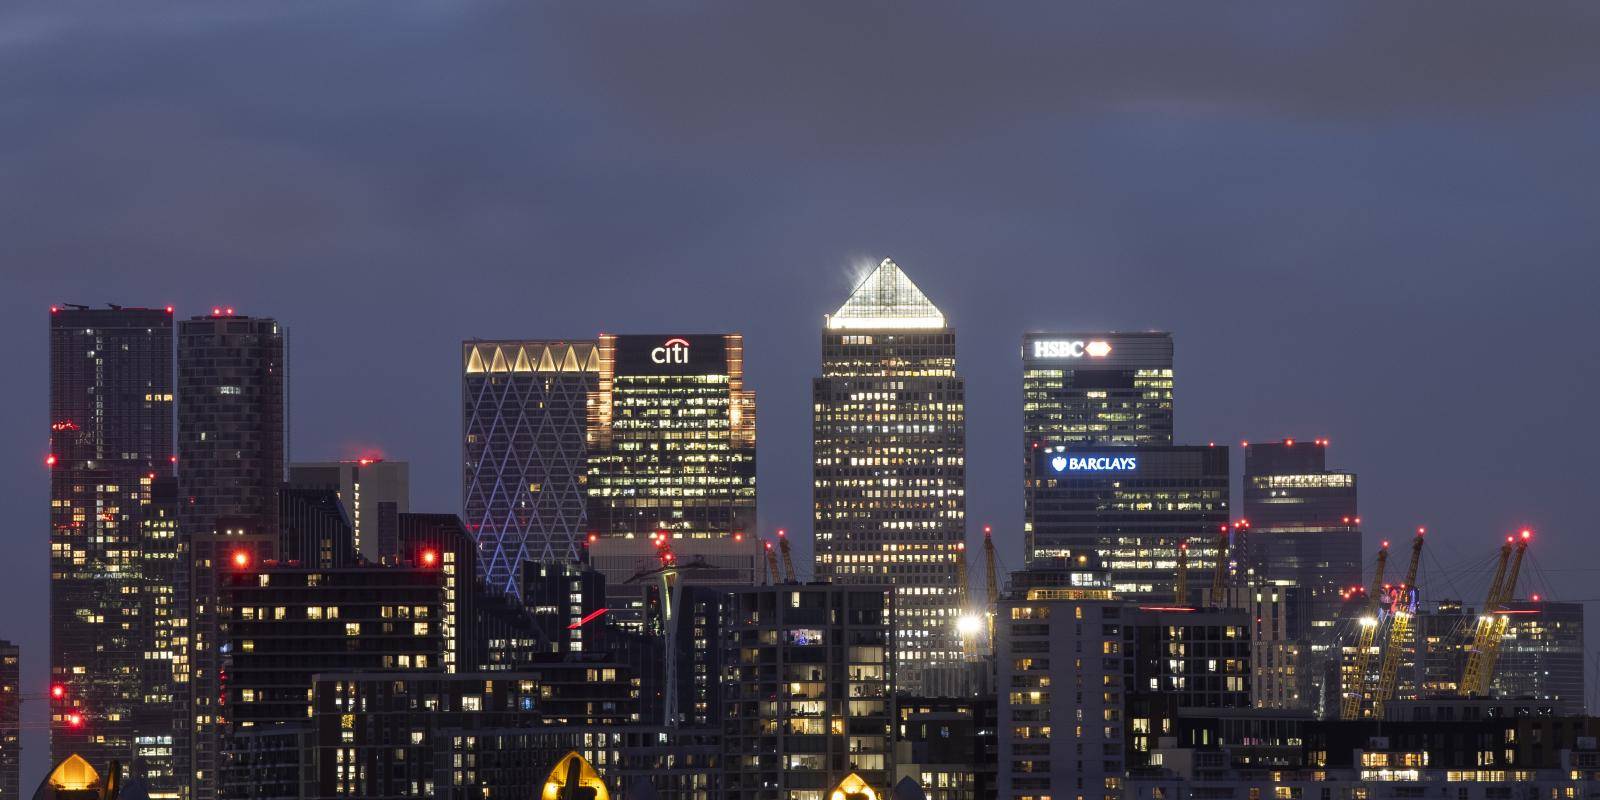 A photo of the Canary Wharf business district in London.